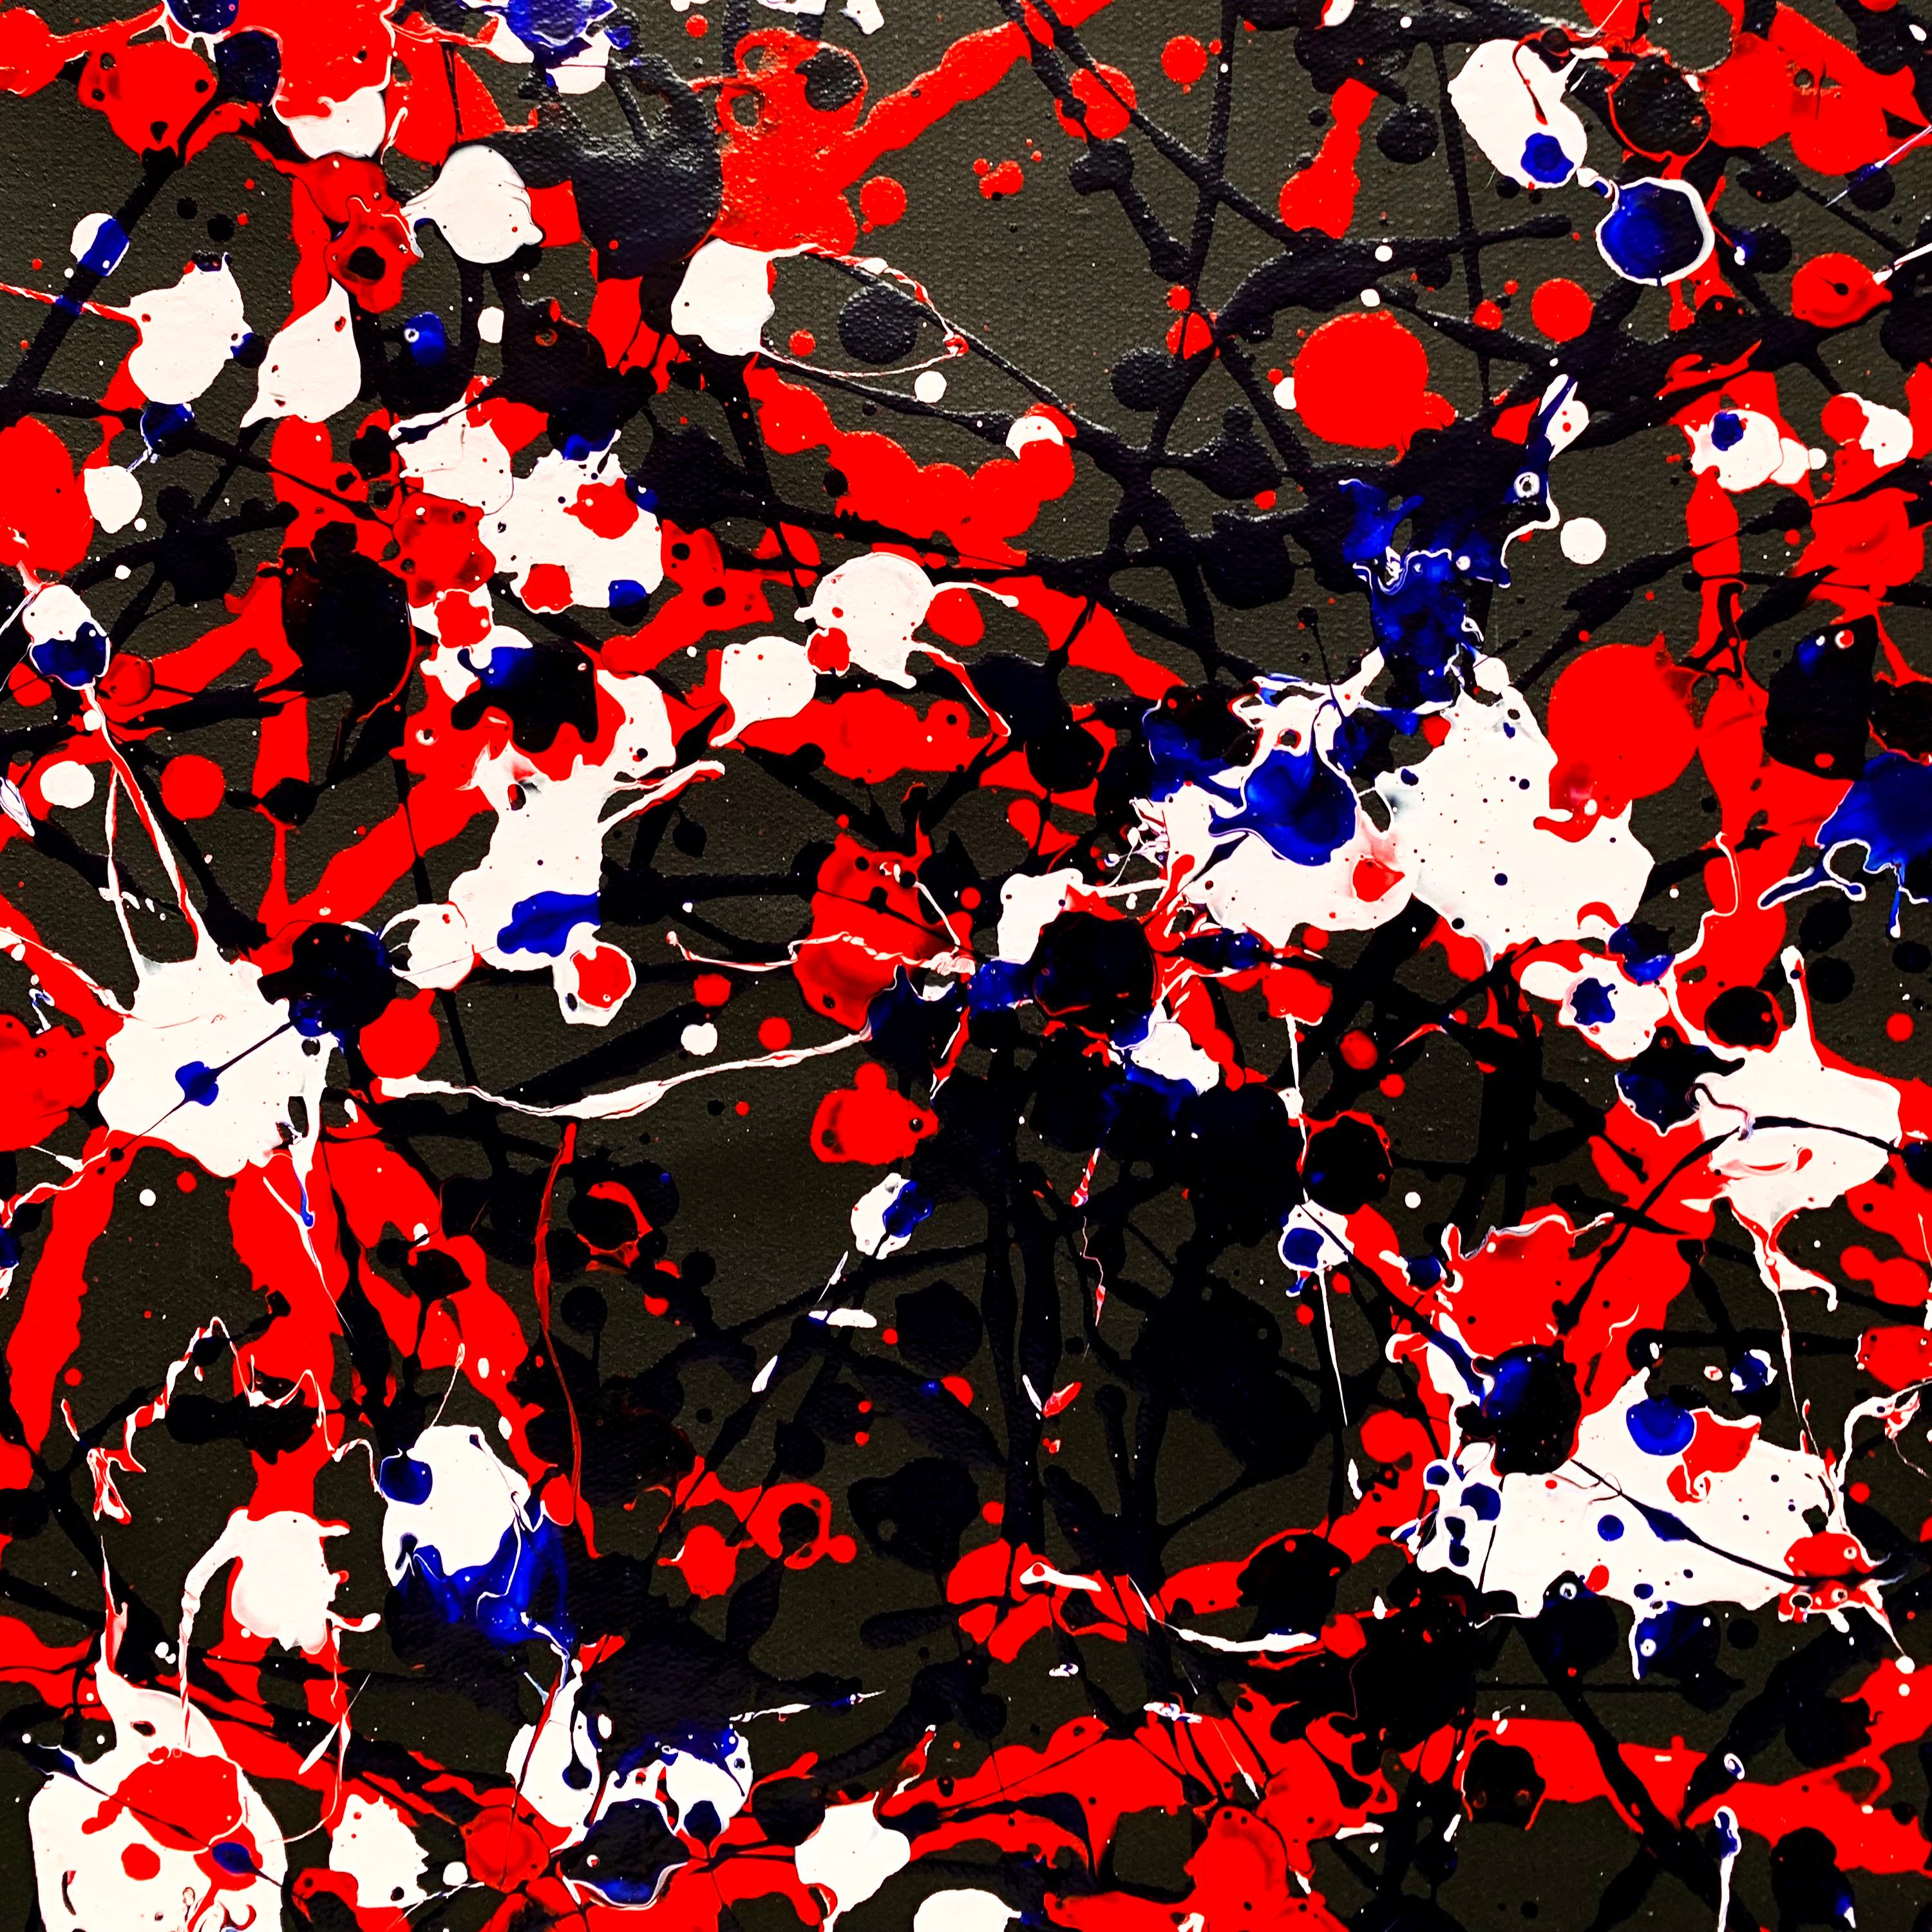 This artwork is an exploration of an action painting with red being the main focus, and it's seemingly formless presence, gives a sense that red dominates the black background. The work is in the style of abstract expressionism.

This artwork is